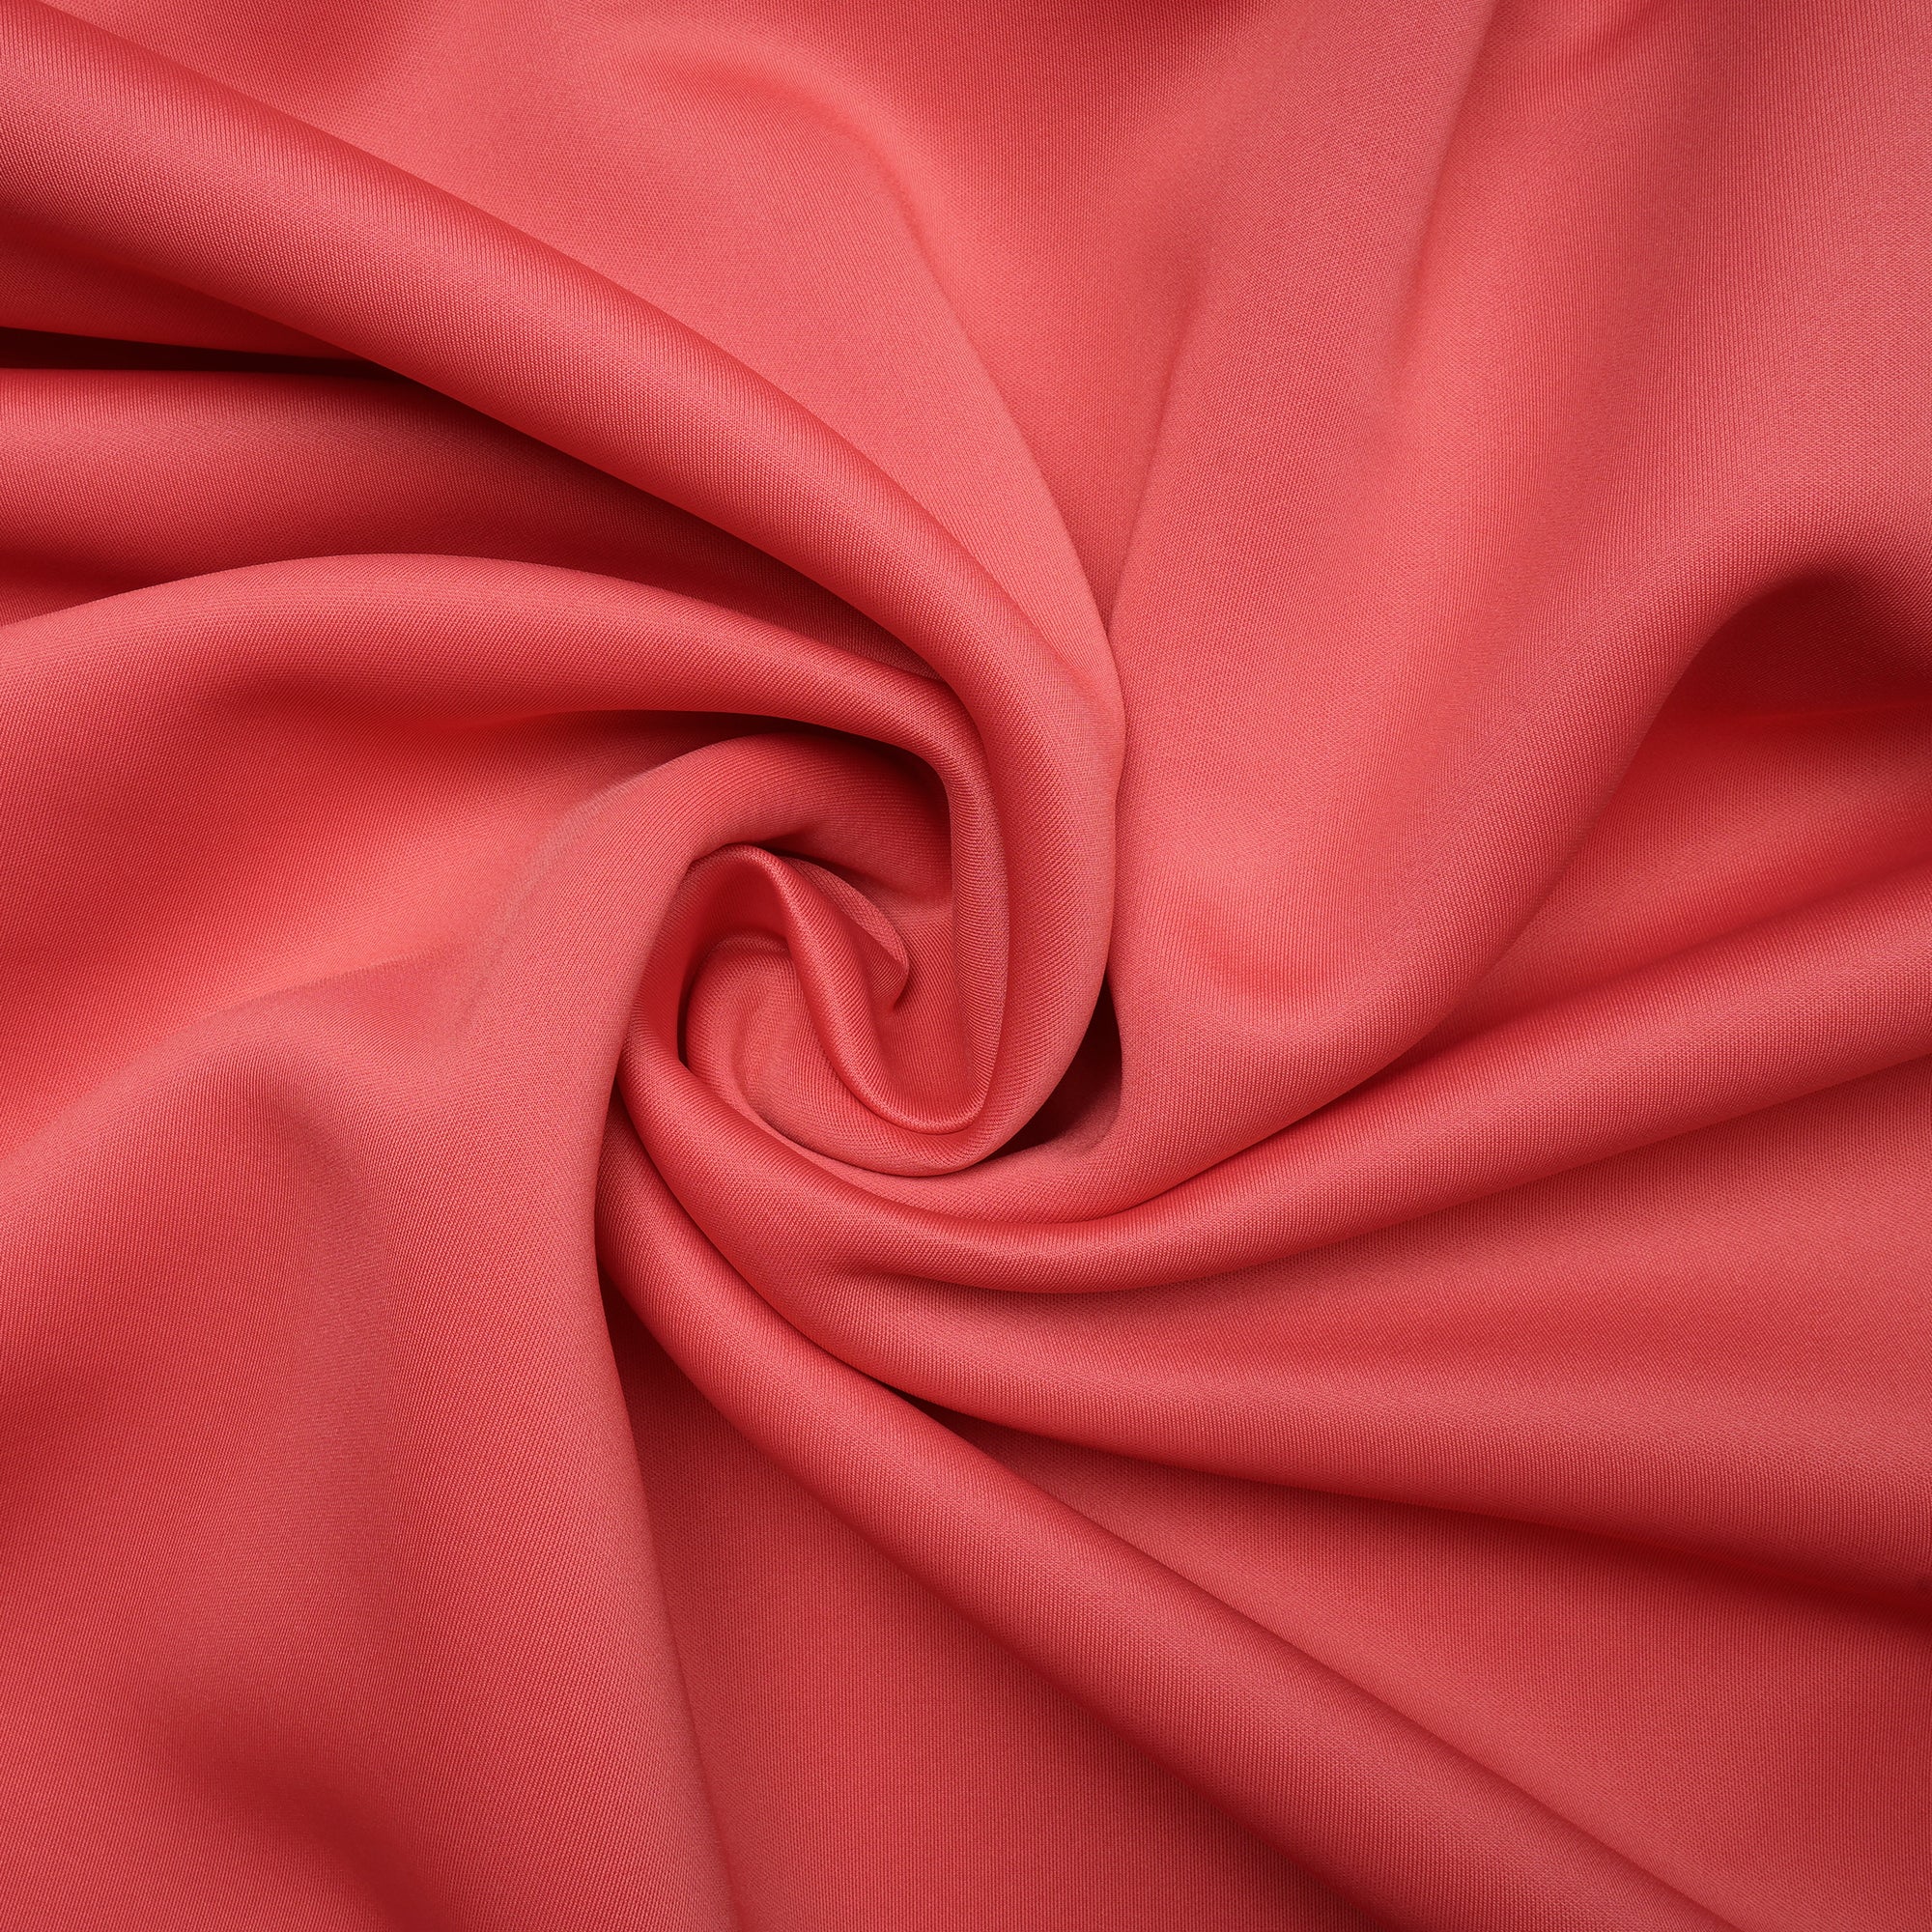 Blush Pink Solid Dyed Imported Neoprene Fabric (60" Width)